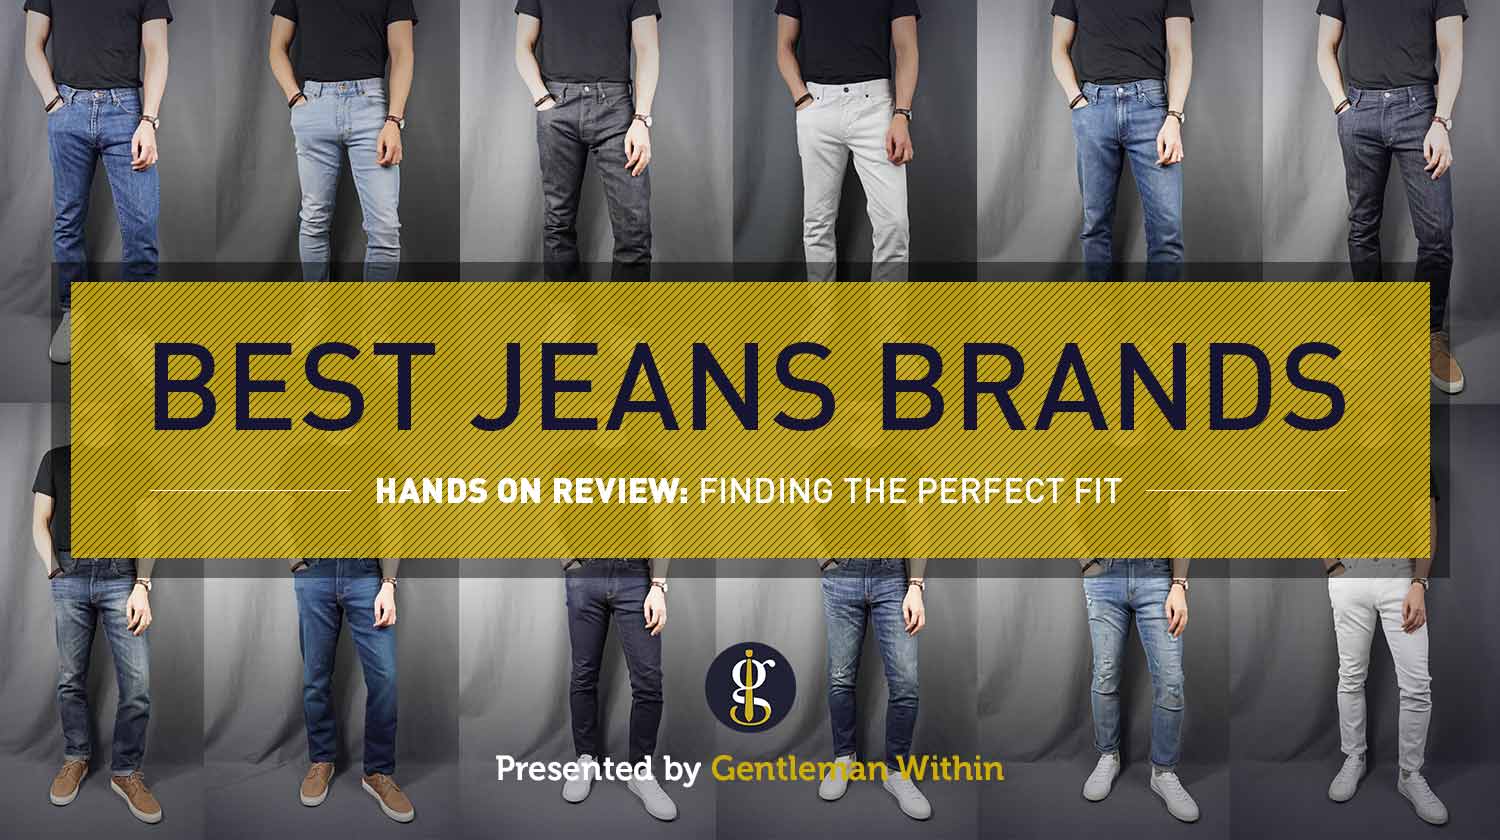 The Best Jeans Brands for Men (Finding the Perfect Fit) | GENTLEMAN WITHIN